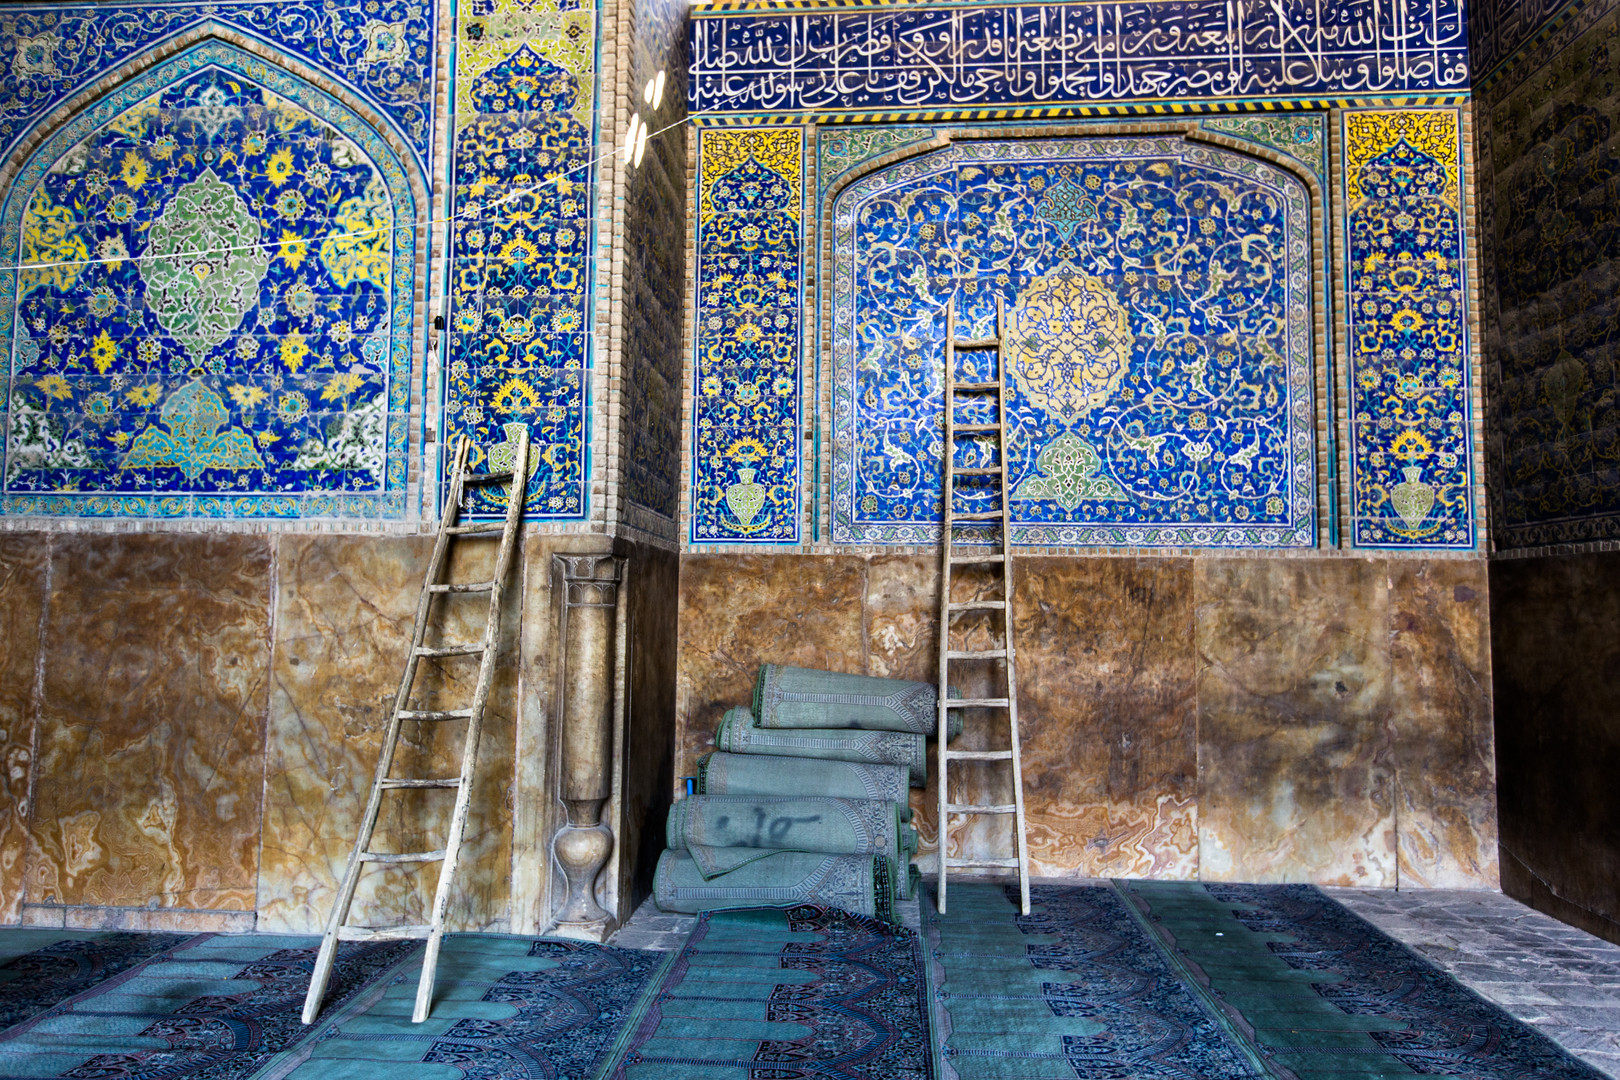 Masdsched-e Emam, Isfahan